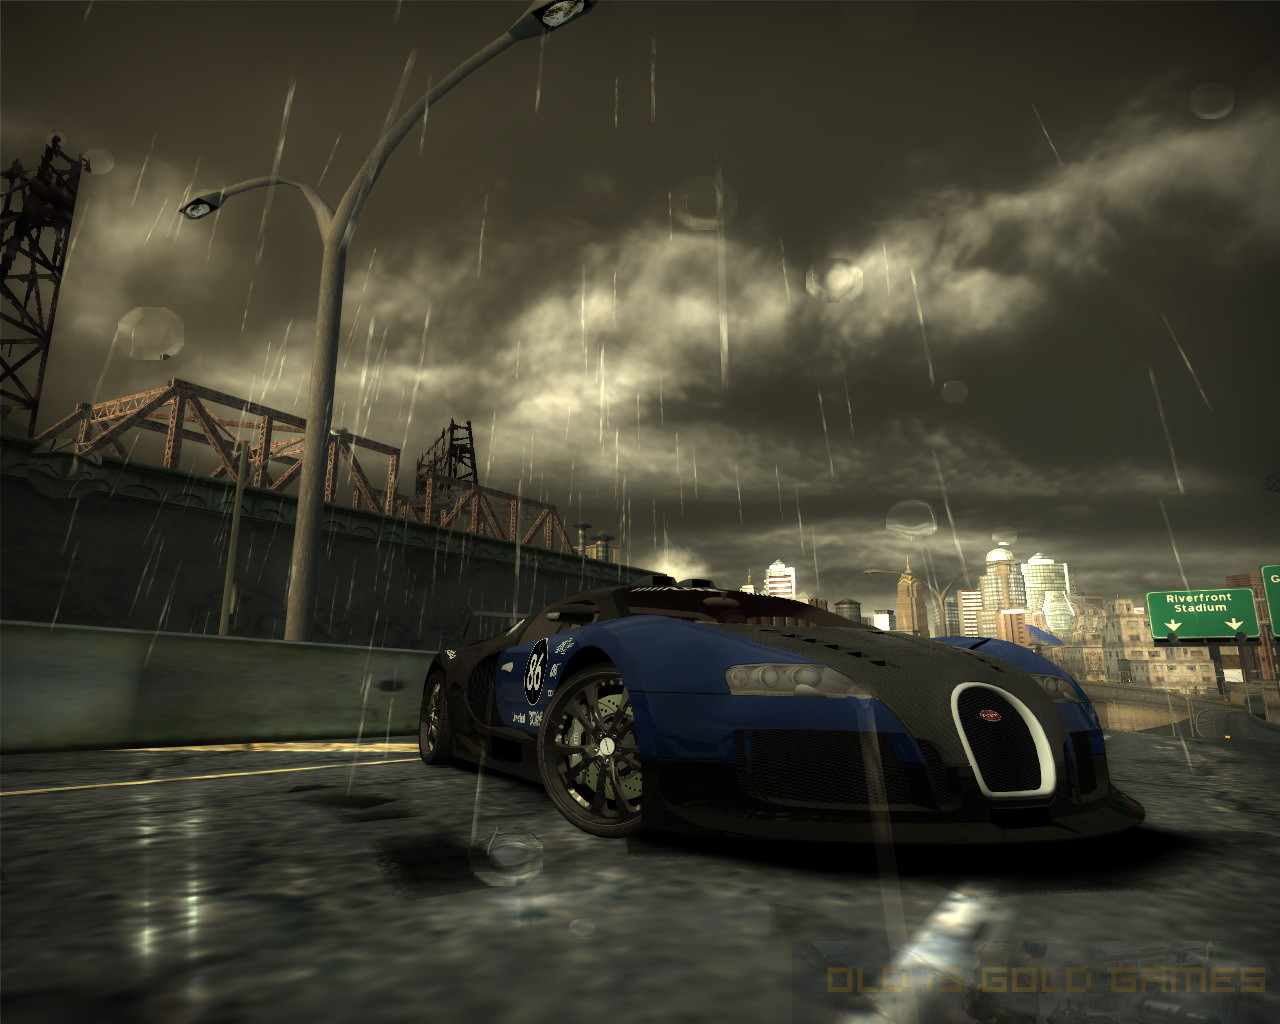 Need for speed 2 free download game setup for windows 7